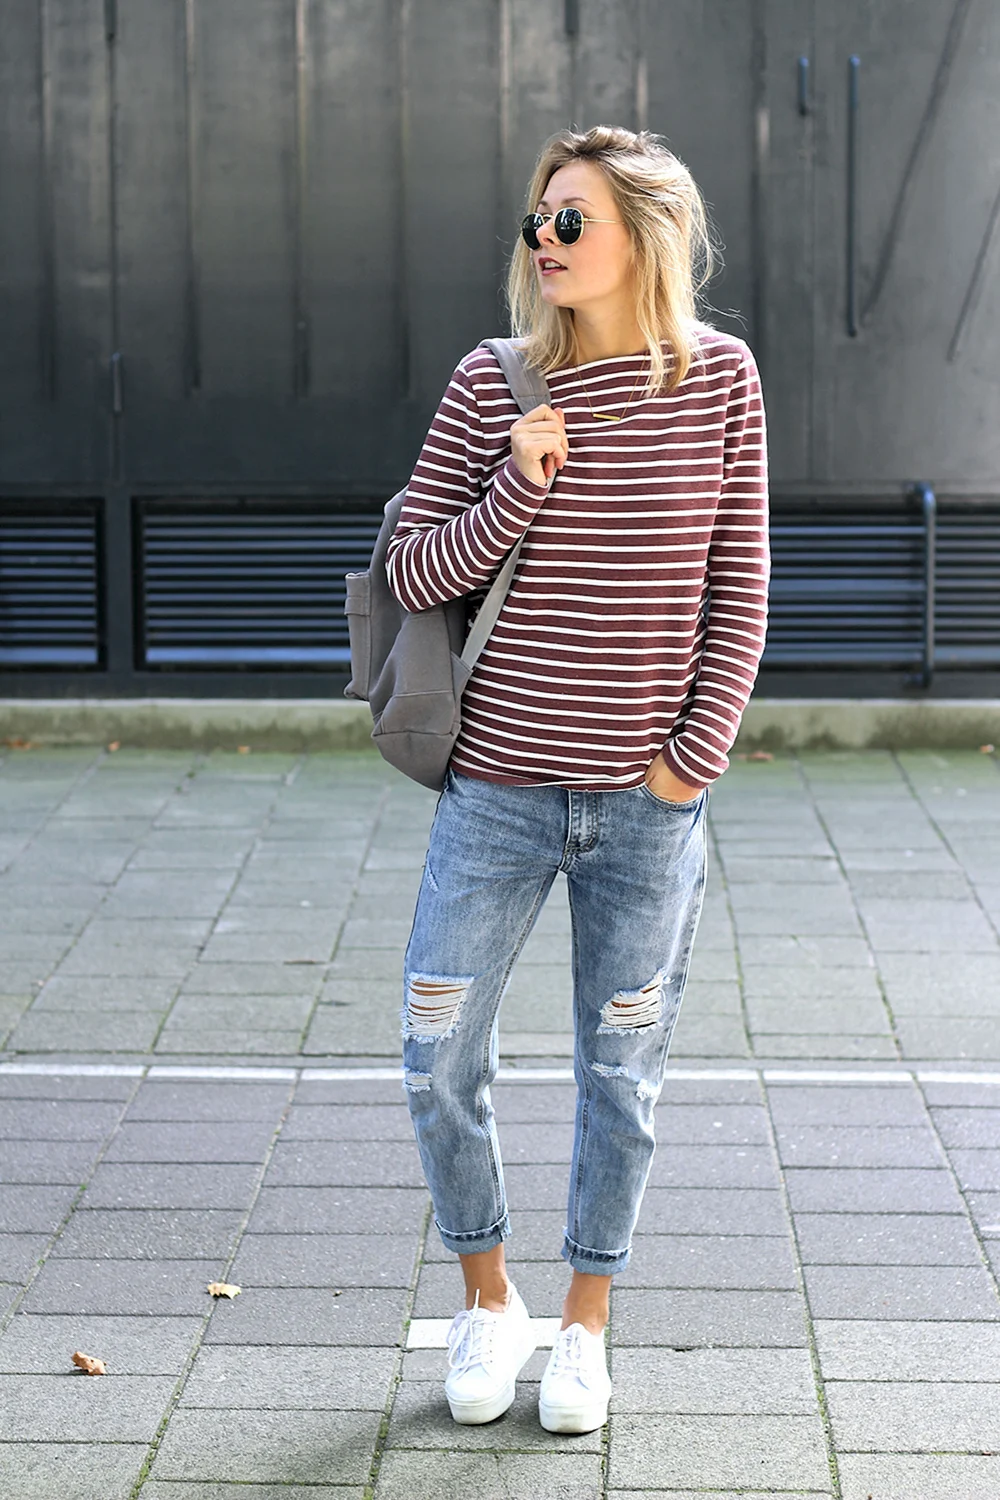 Sneakers with Jeans outfits